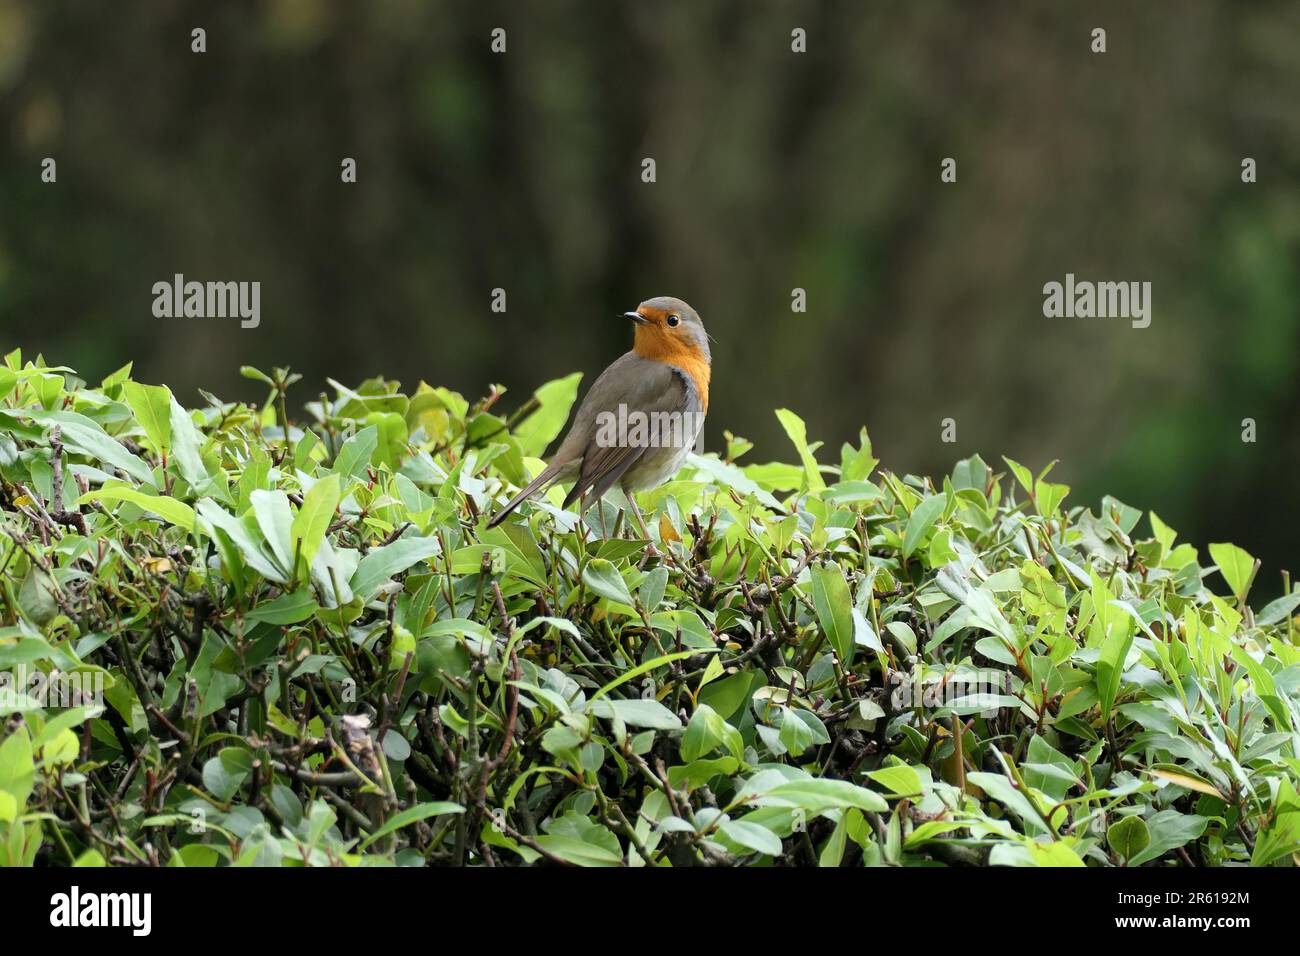 The robin is sitting on a bush Stock Photo